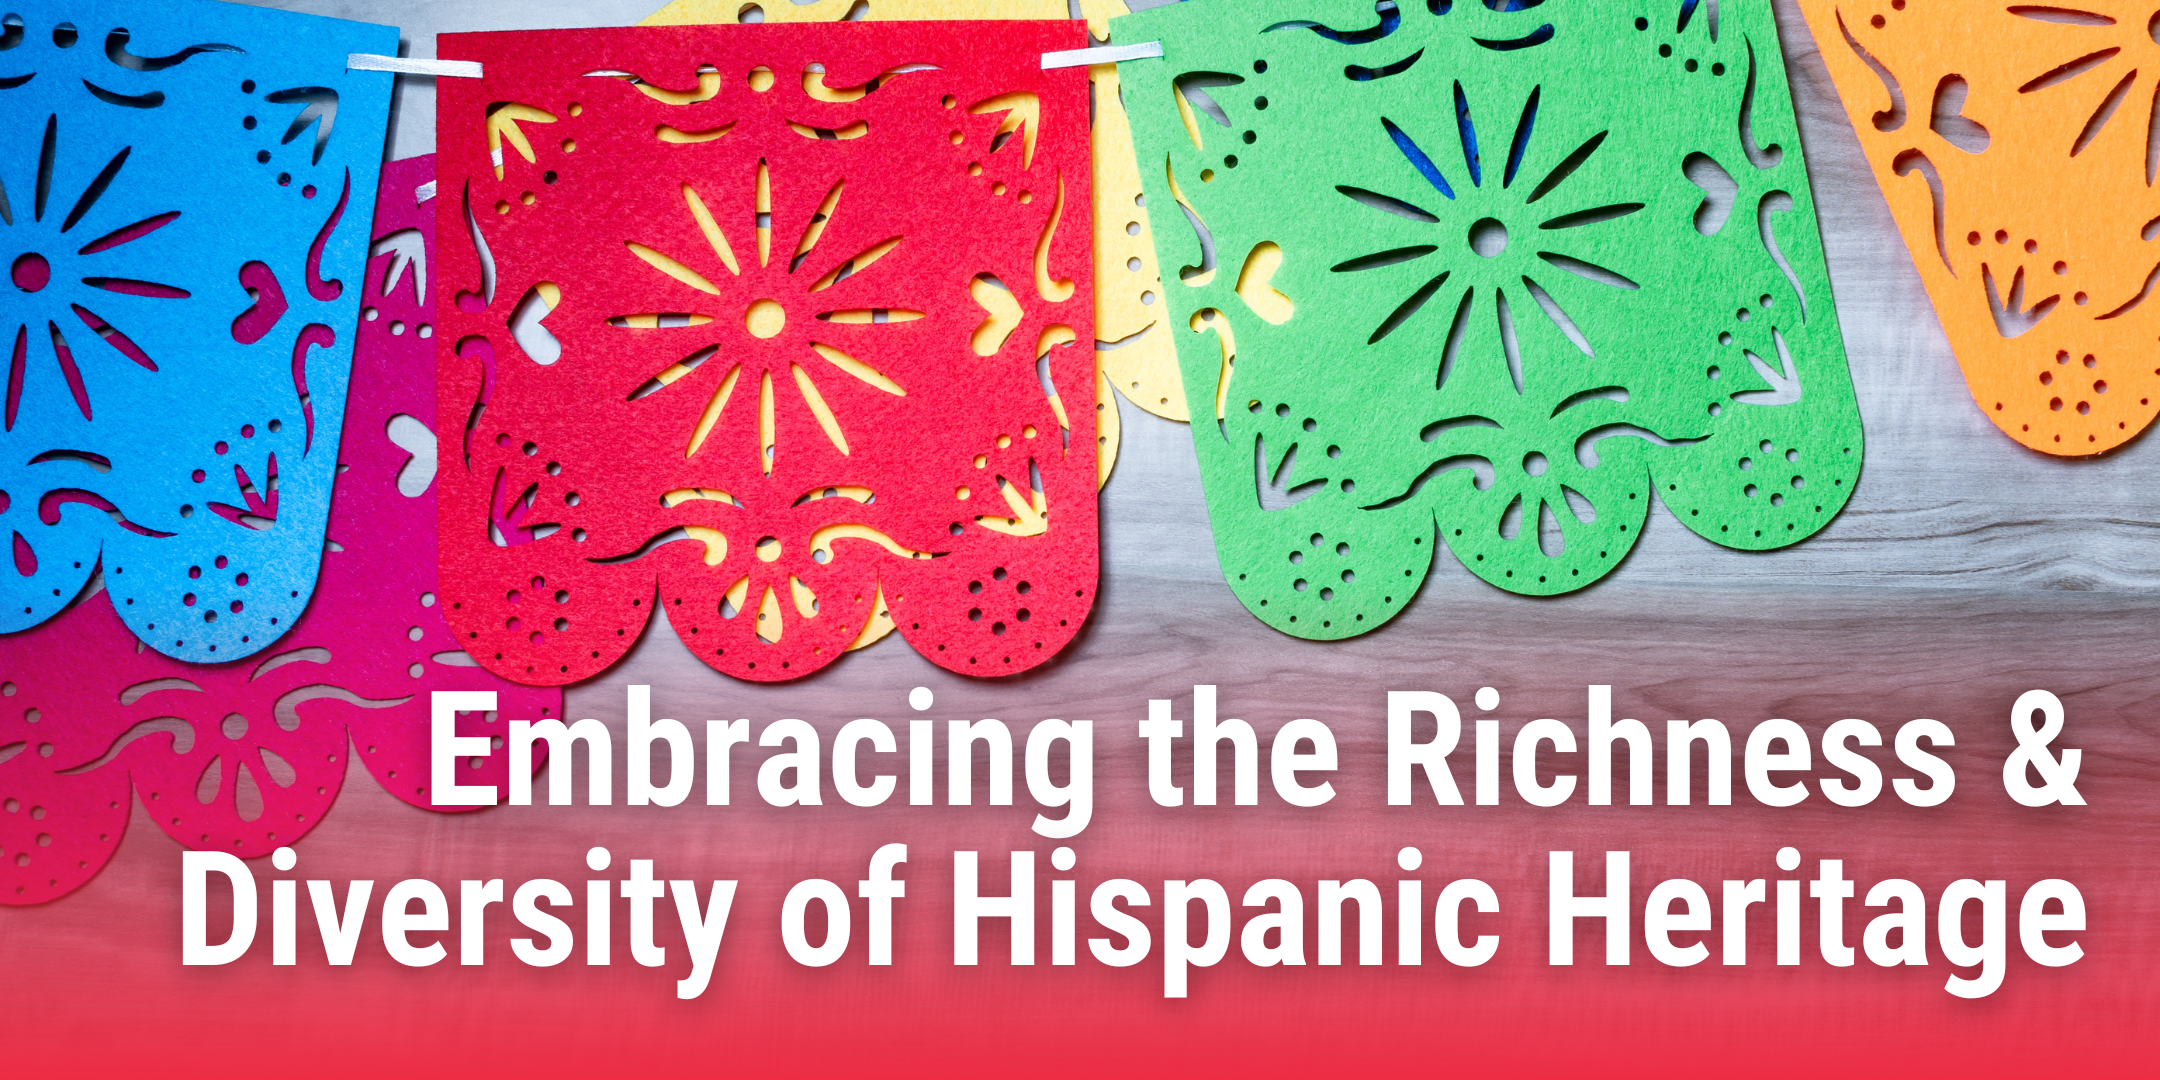 Colorful banner displaying Mexican papel picado banners. There is a text overlay displaying the blog title "Embracing the Richness and Diversity of Hispanic Heritage: Celebrating Hispanic Heritage Month".